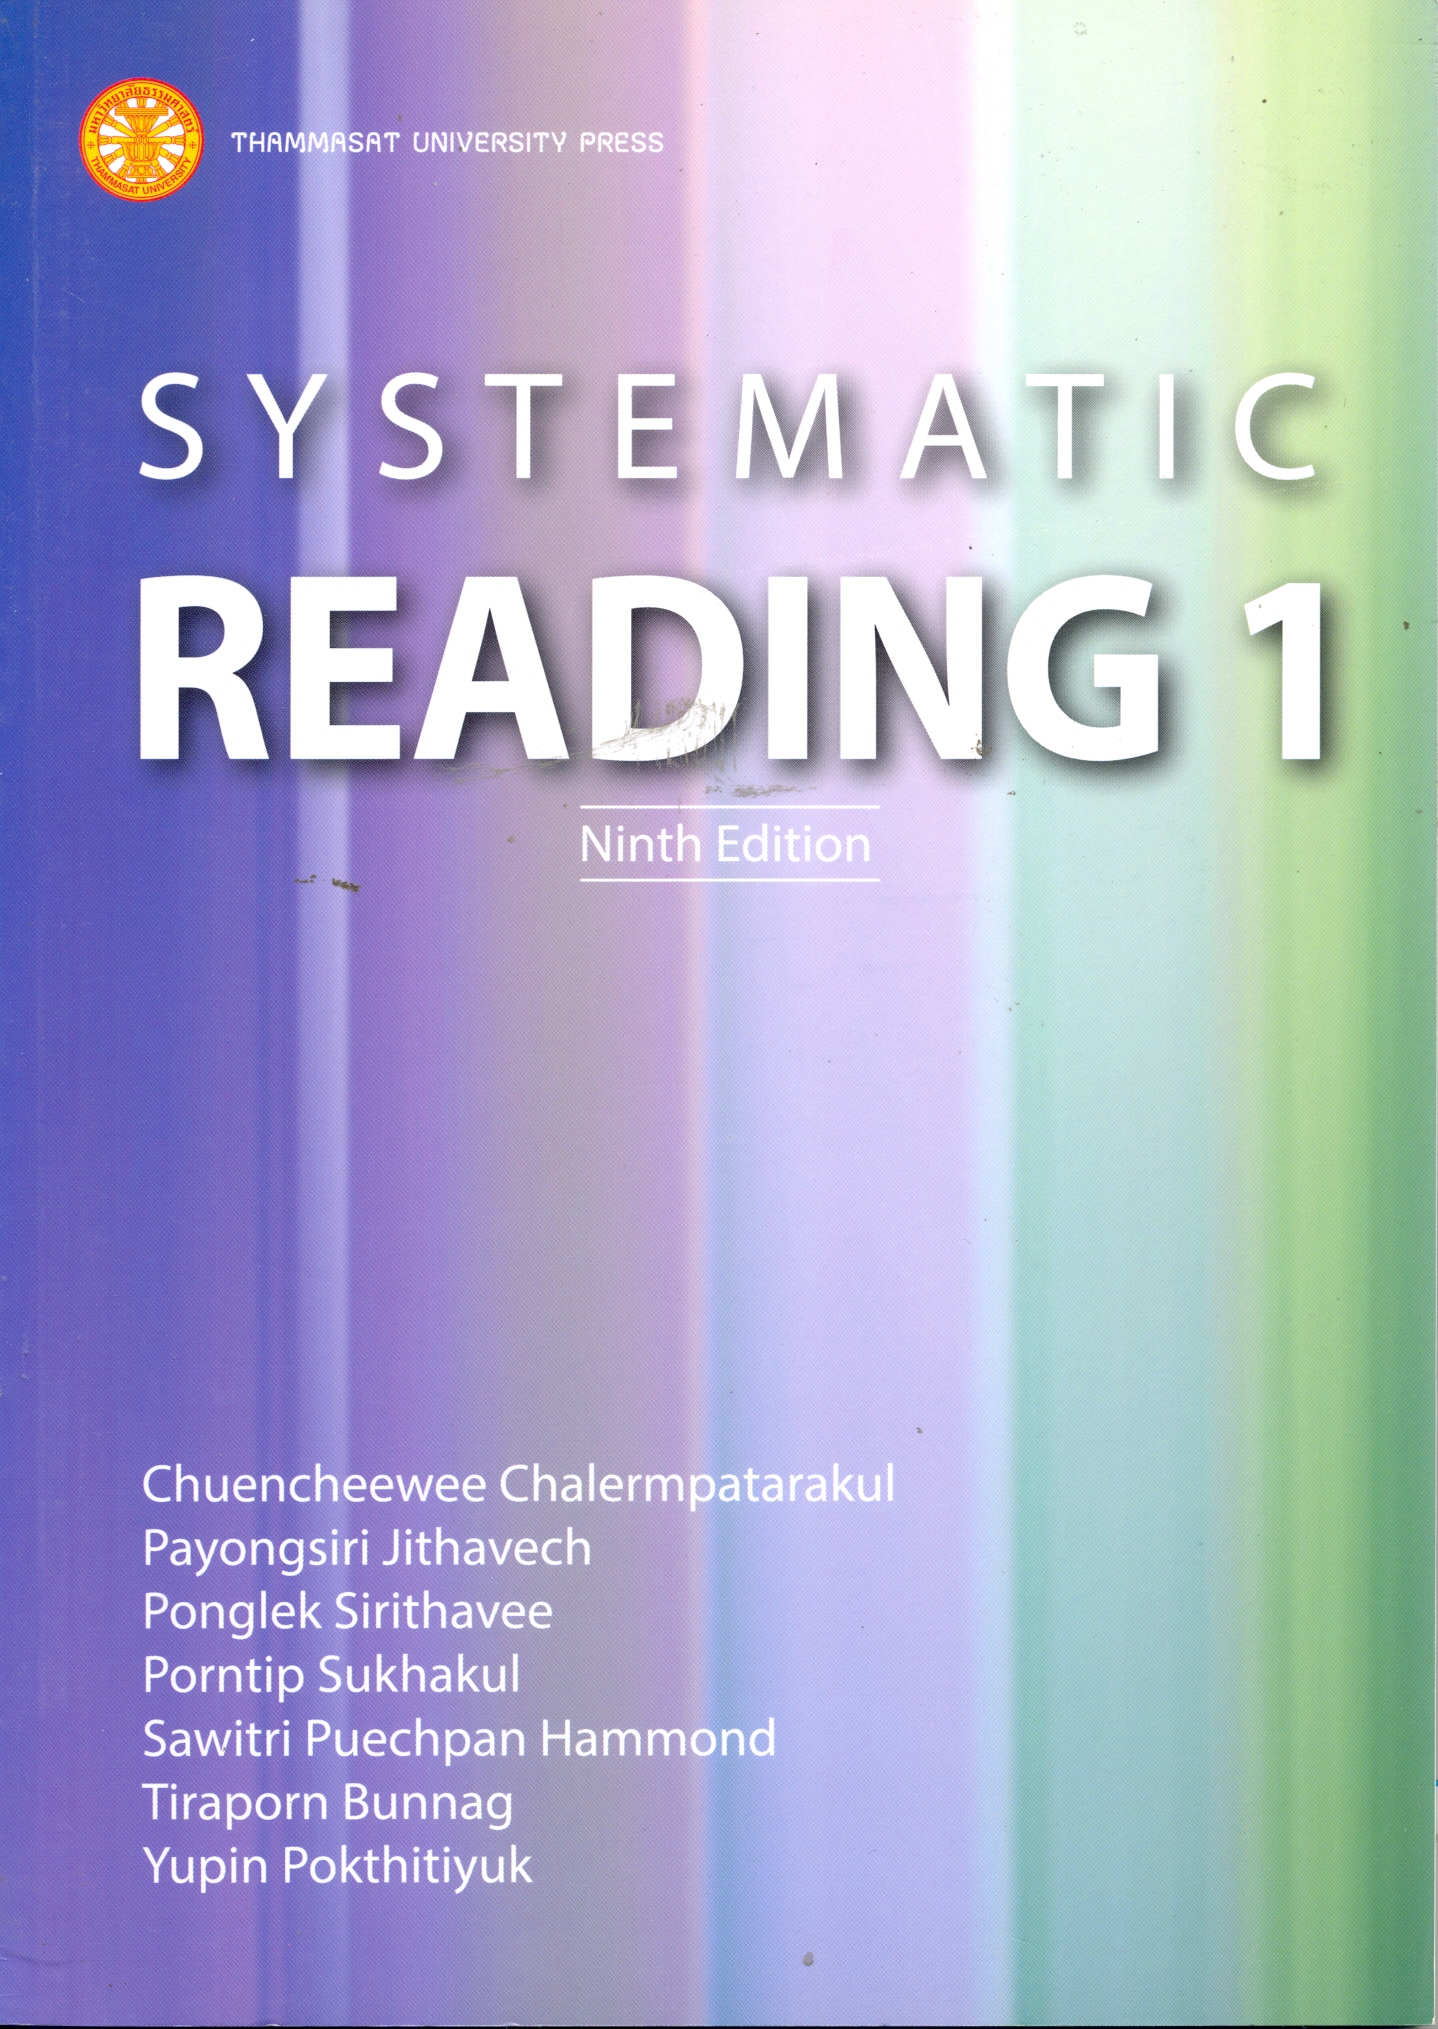 Systematic reading